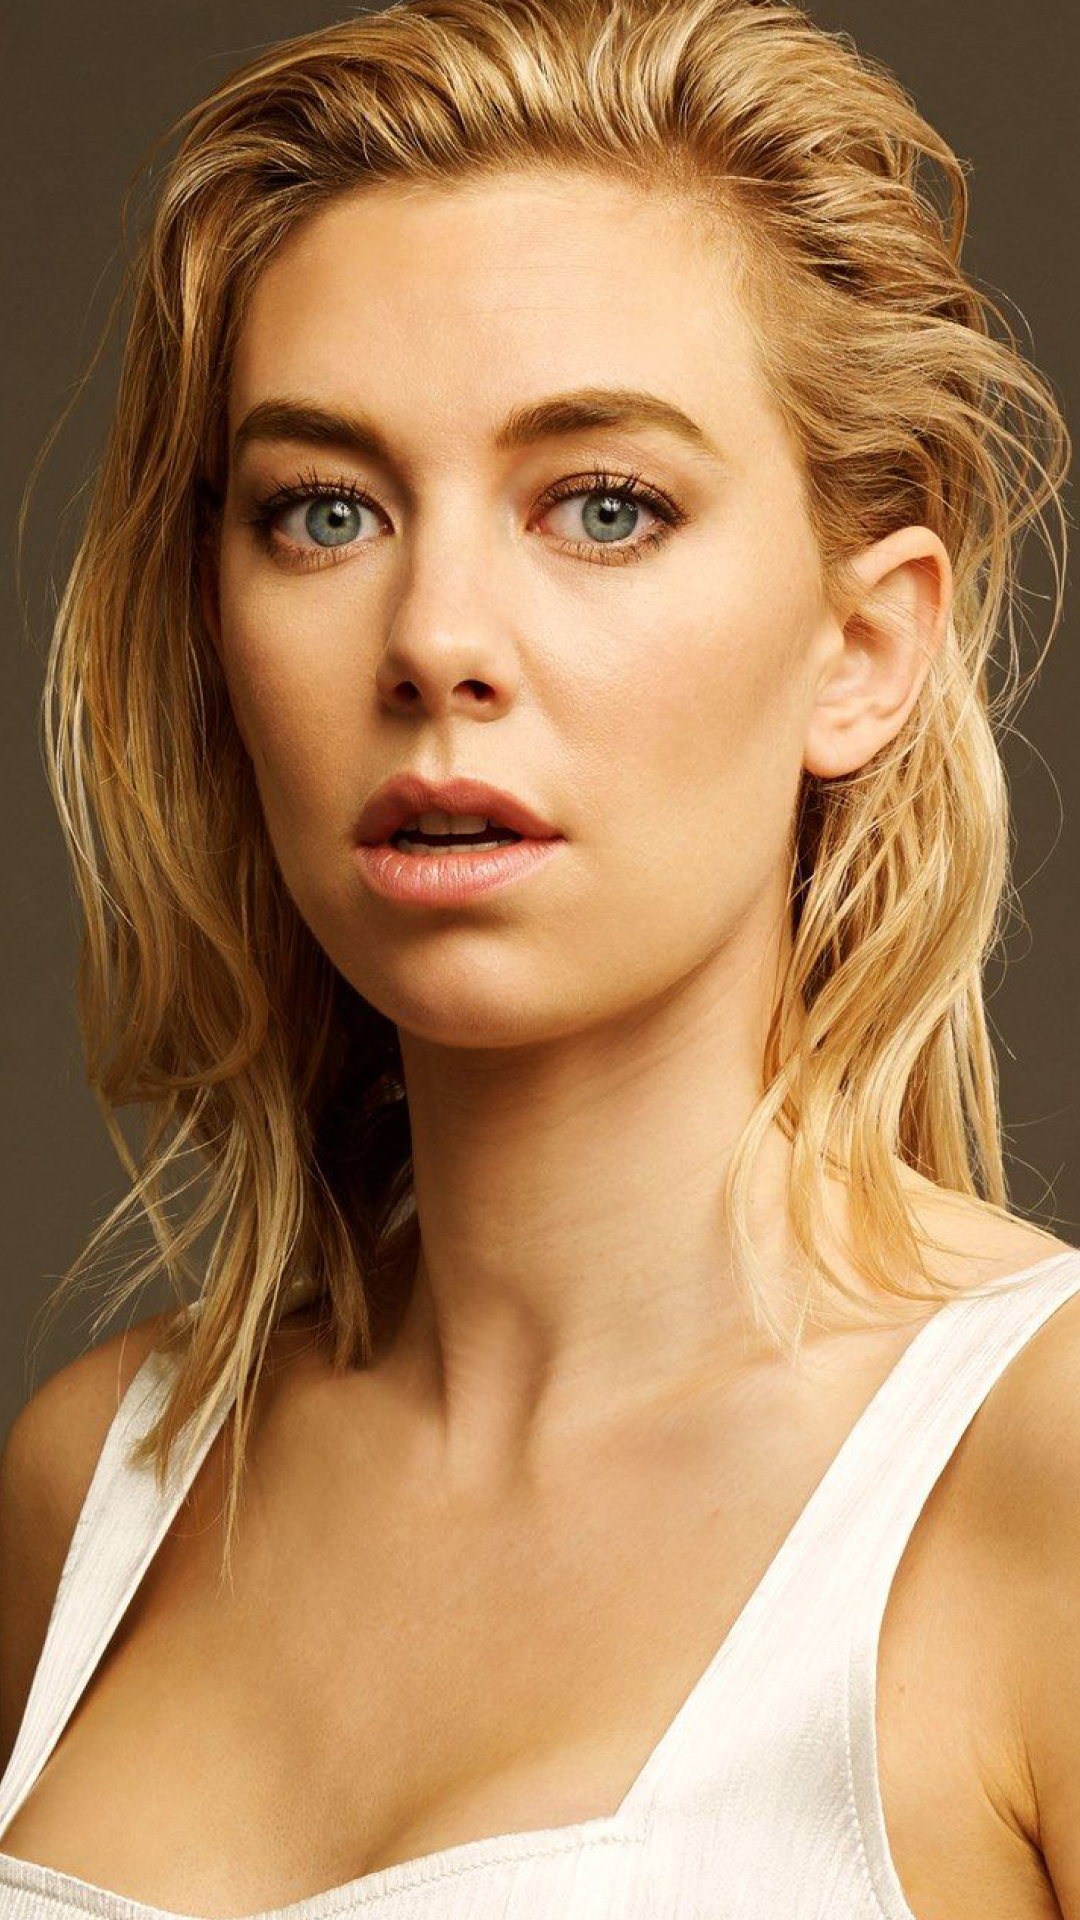 1080x1920 Resolution Vanessa Kirby Face 2020 Iphone 7, 6s, 6 Plus and ...